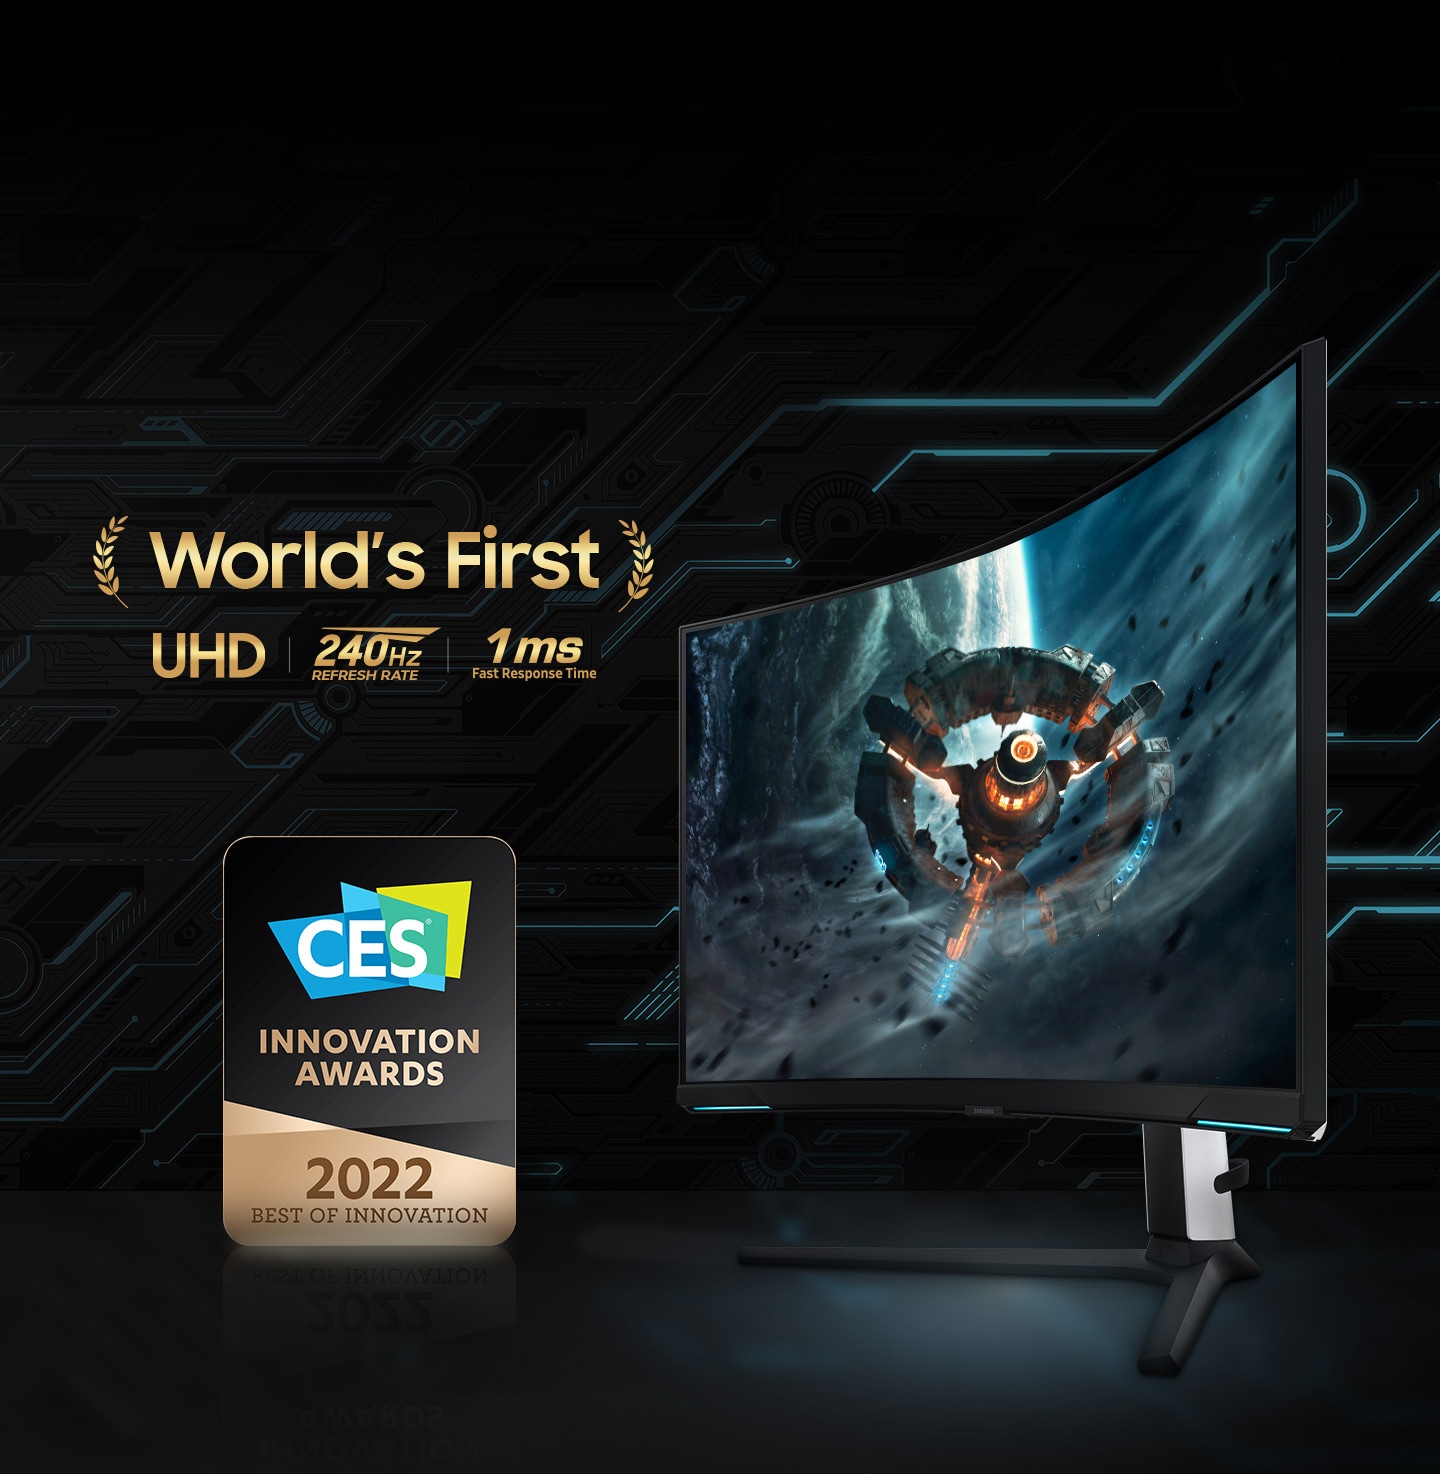 On the monitor display which is pivoted slightly to the left. Next to the monitor are the words "World's first", with included on the icons on UHD resolution, 240Hz refresh rate and 1ms fast response time. And a CES Innovation Awards 2022 Best of Innovation logo.